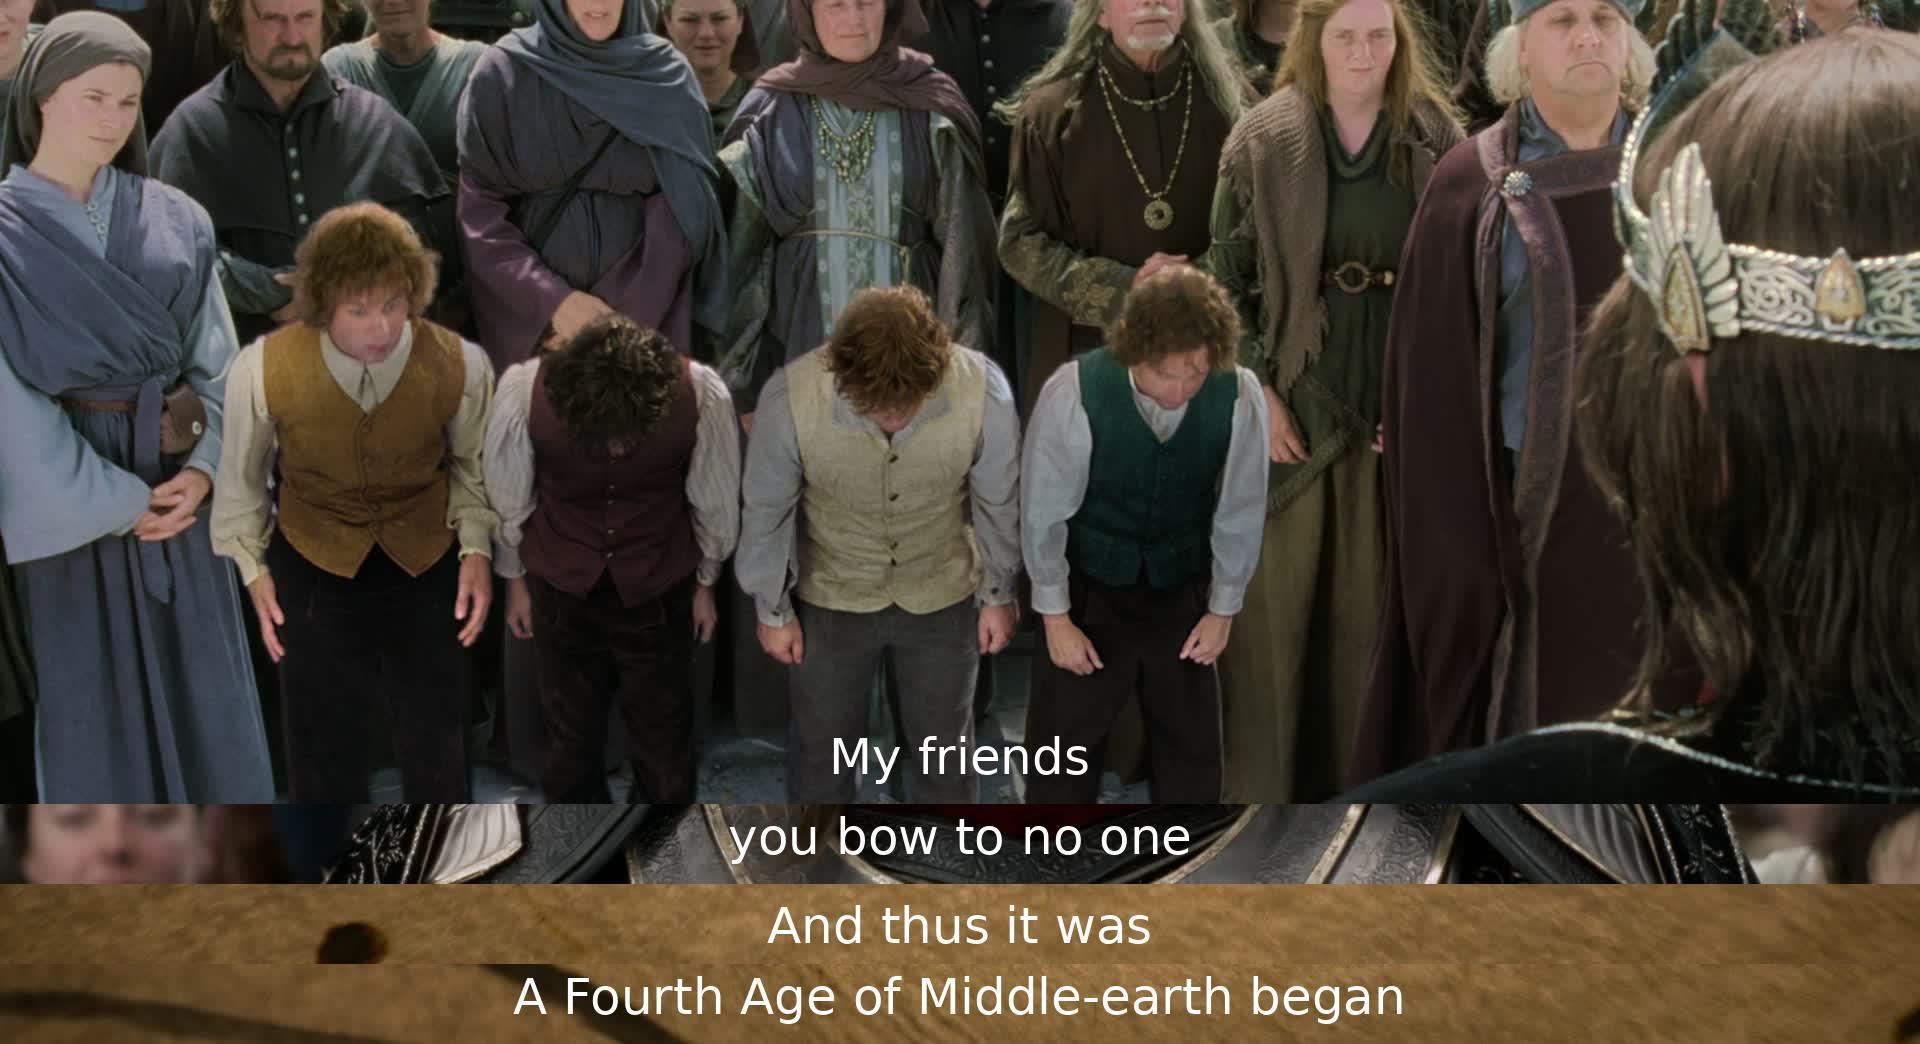 In a heartfelt moment, the characters receive recognition for their valor, starting a new era in Middle-earth as they are honored for their bravery and selflessness.